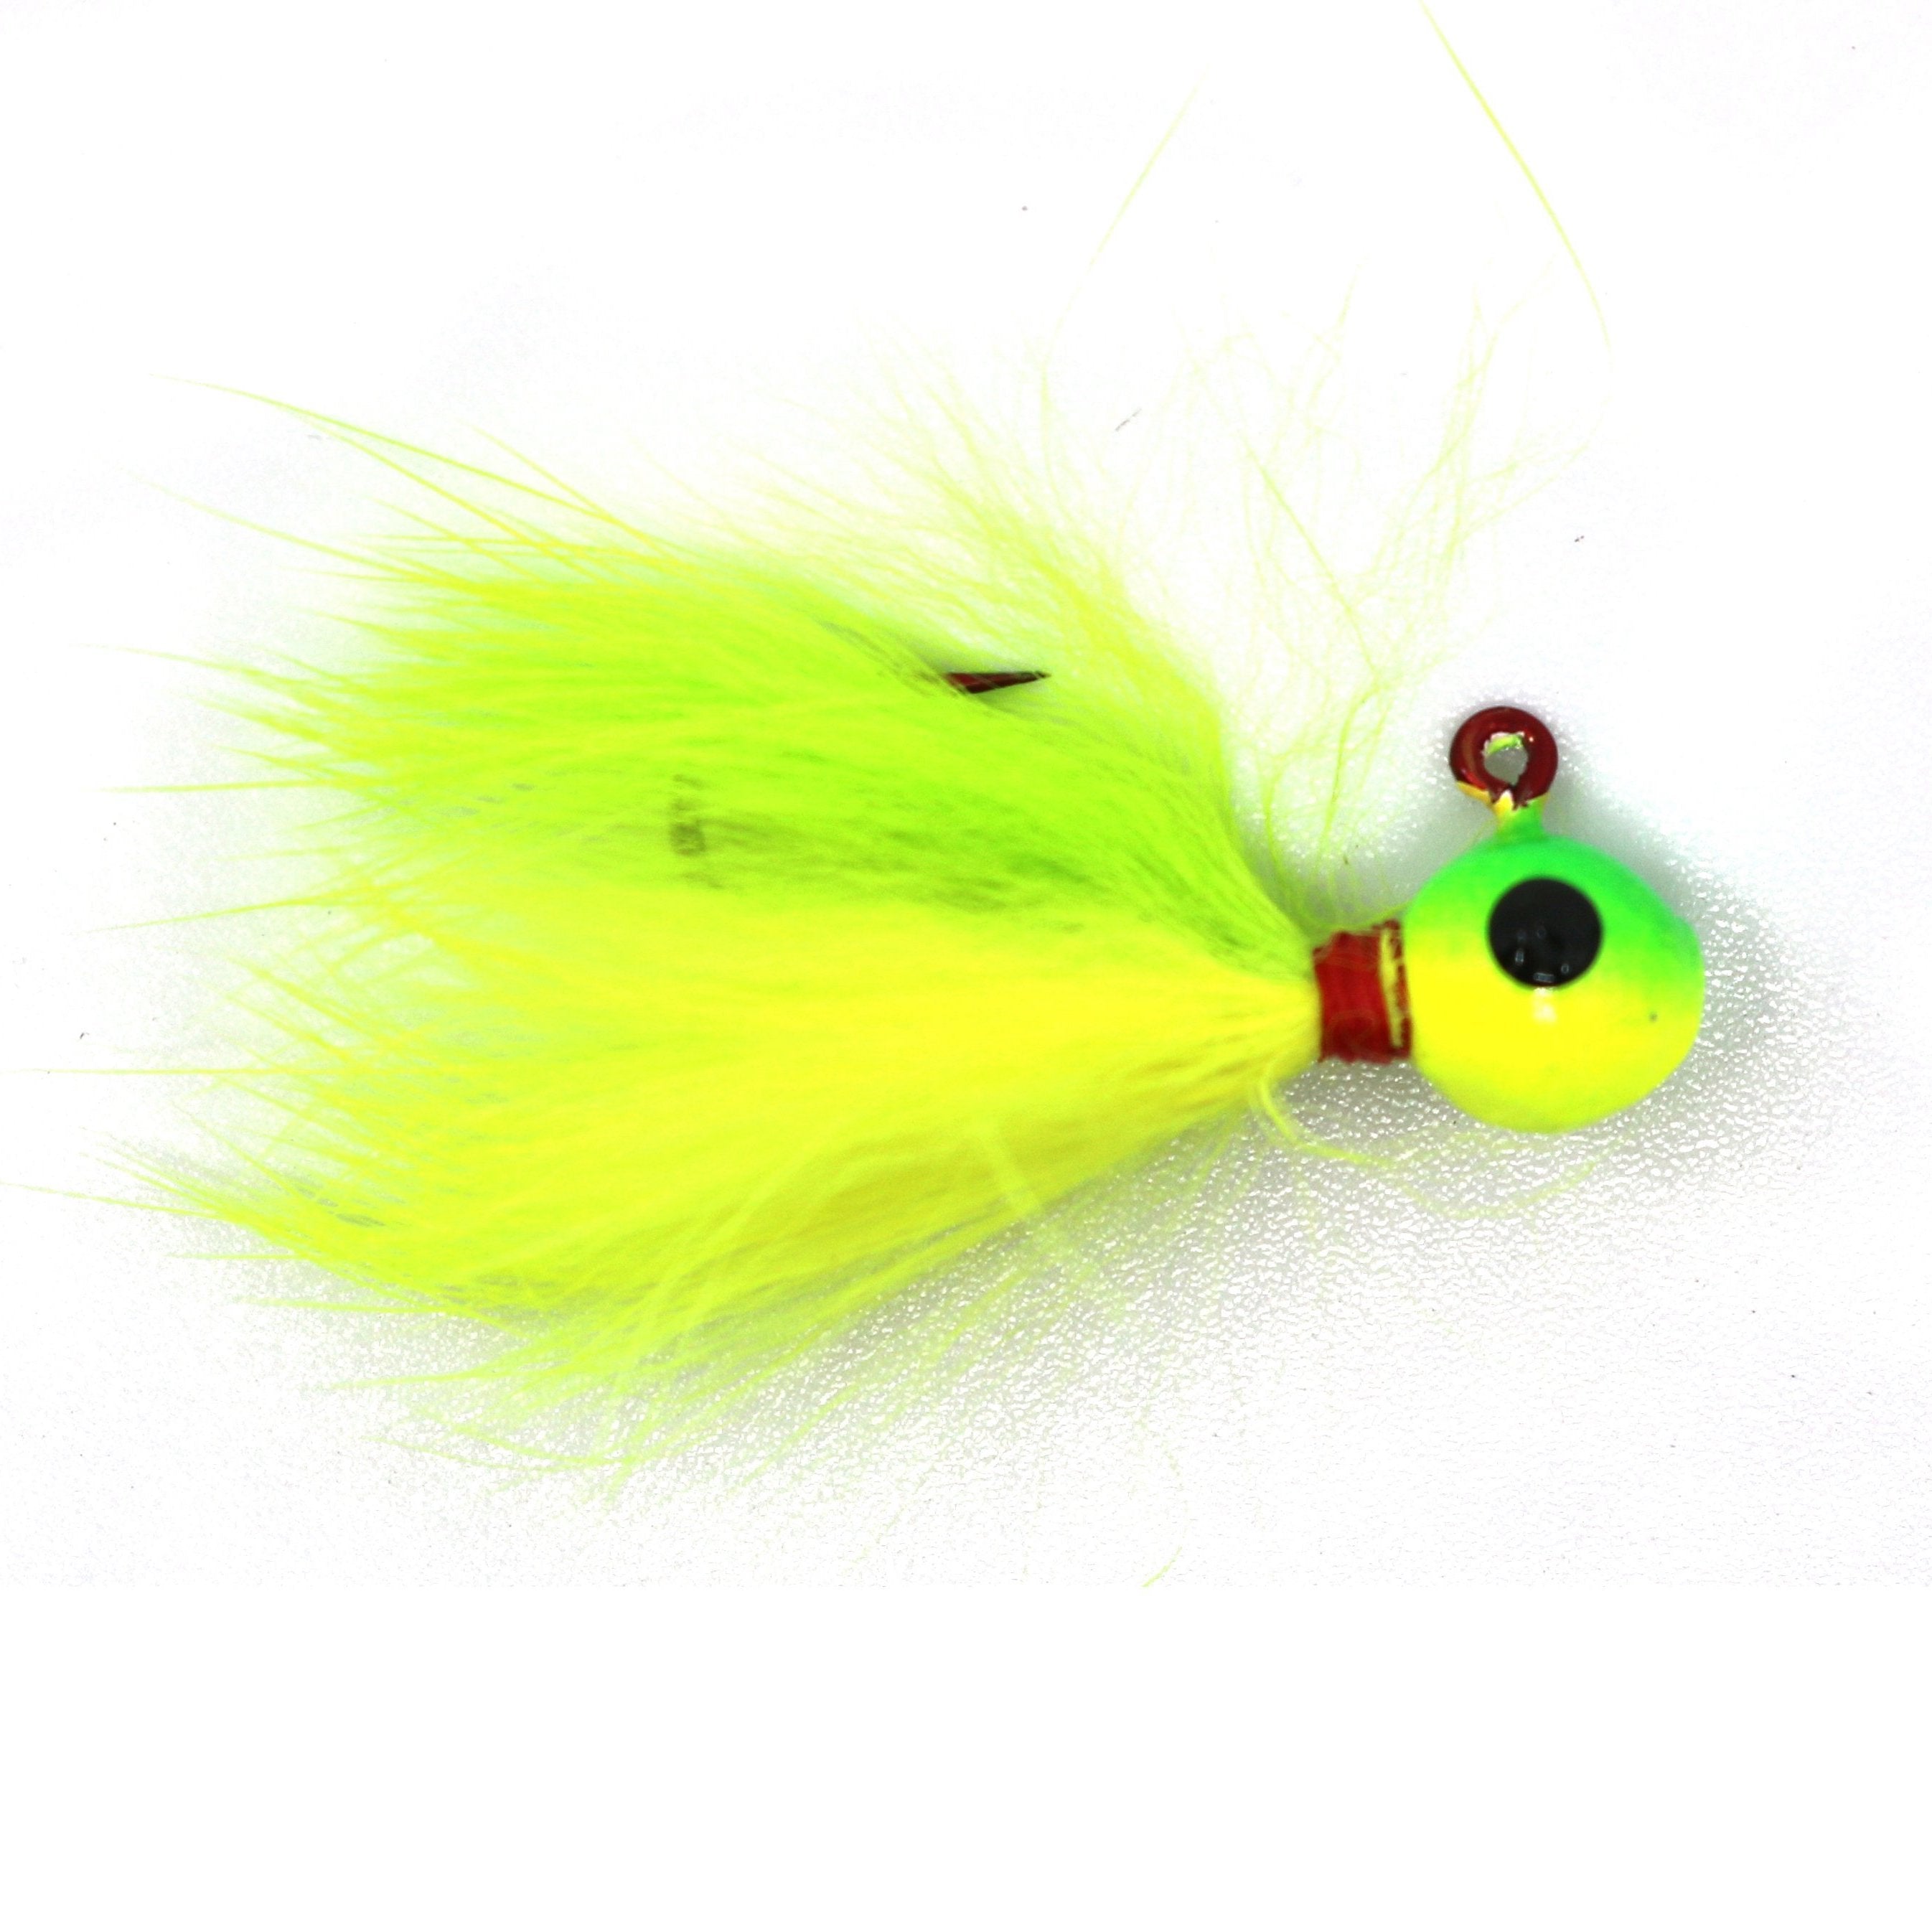 Feather Jigs - Nothead Tackle